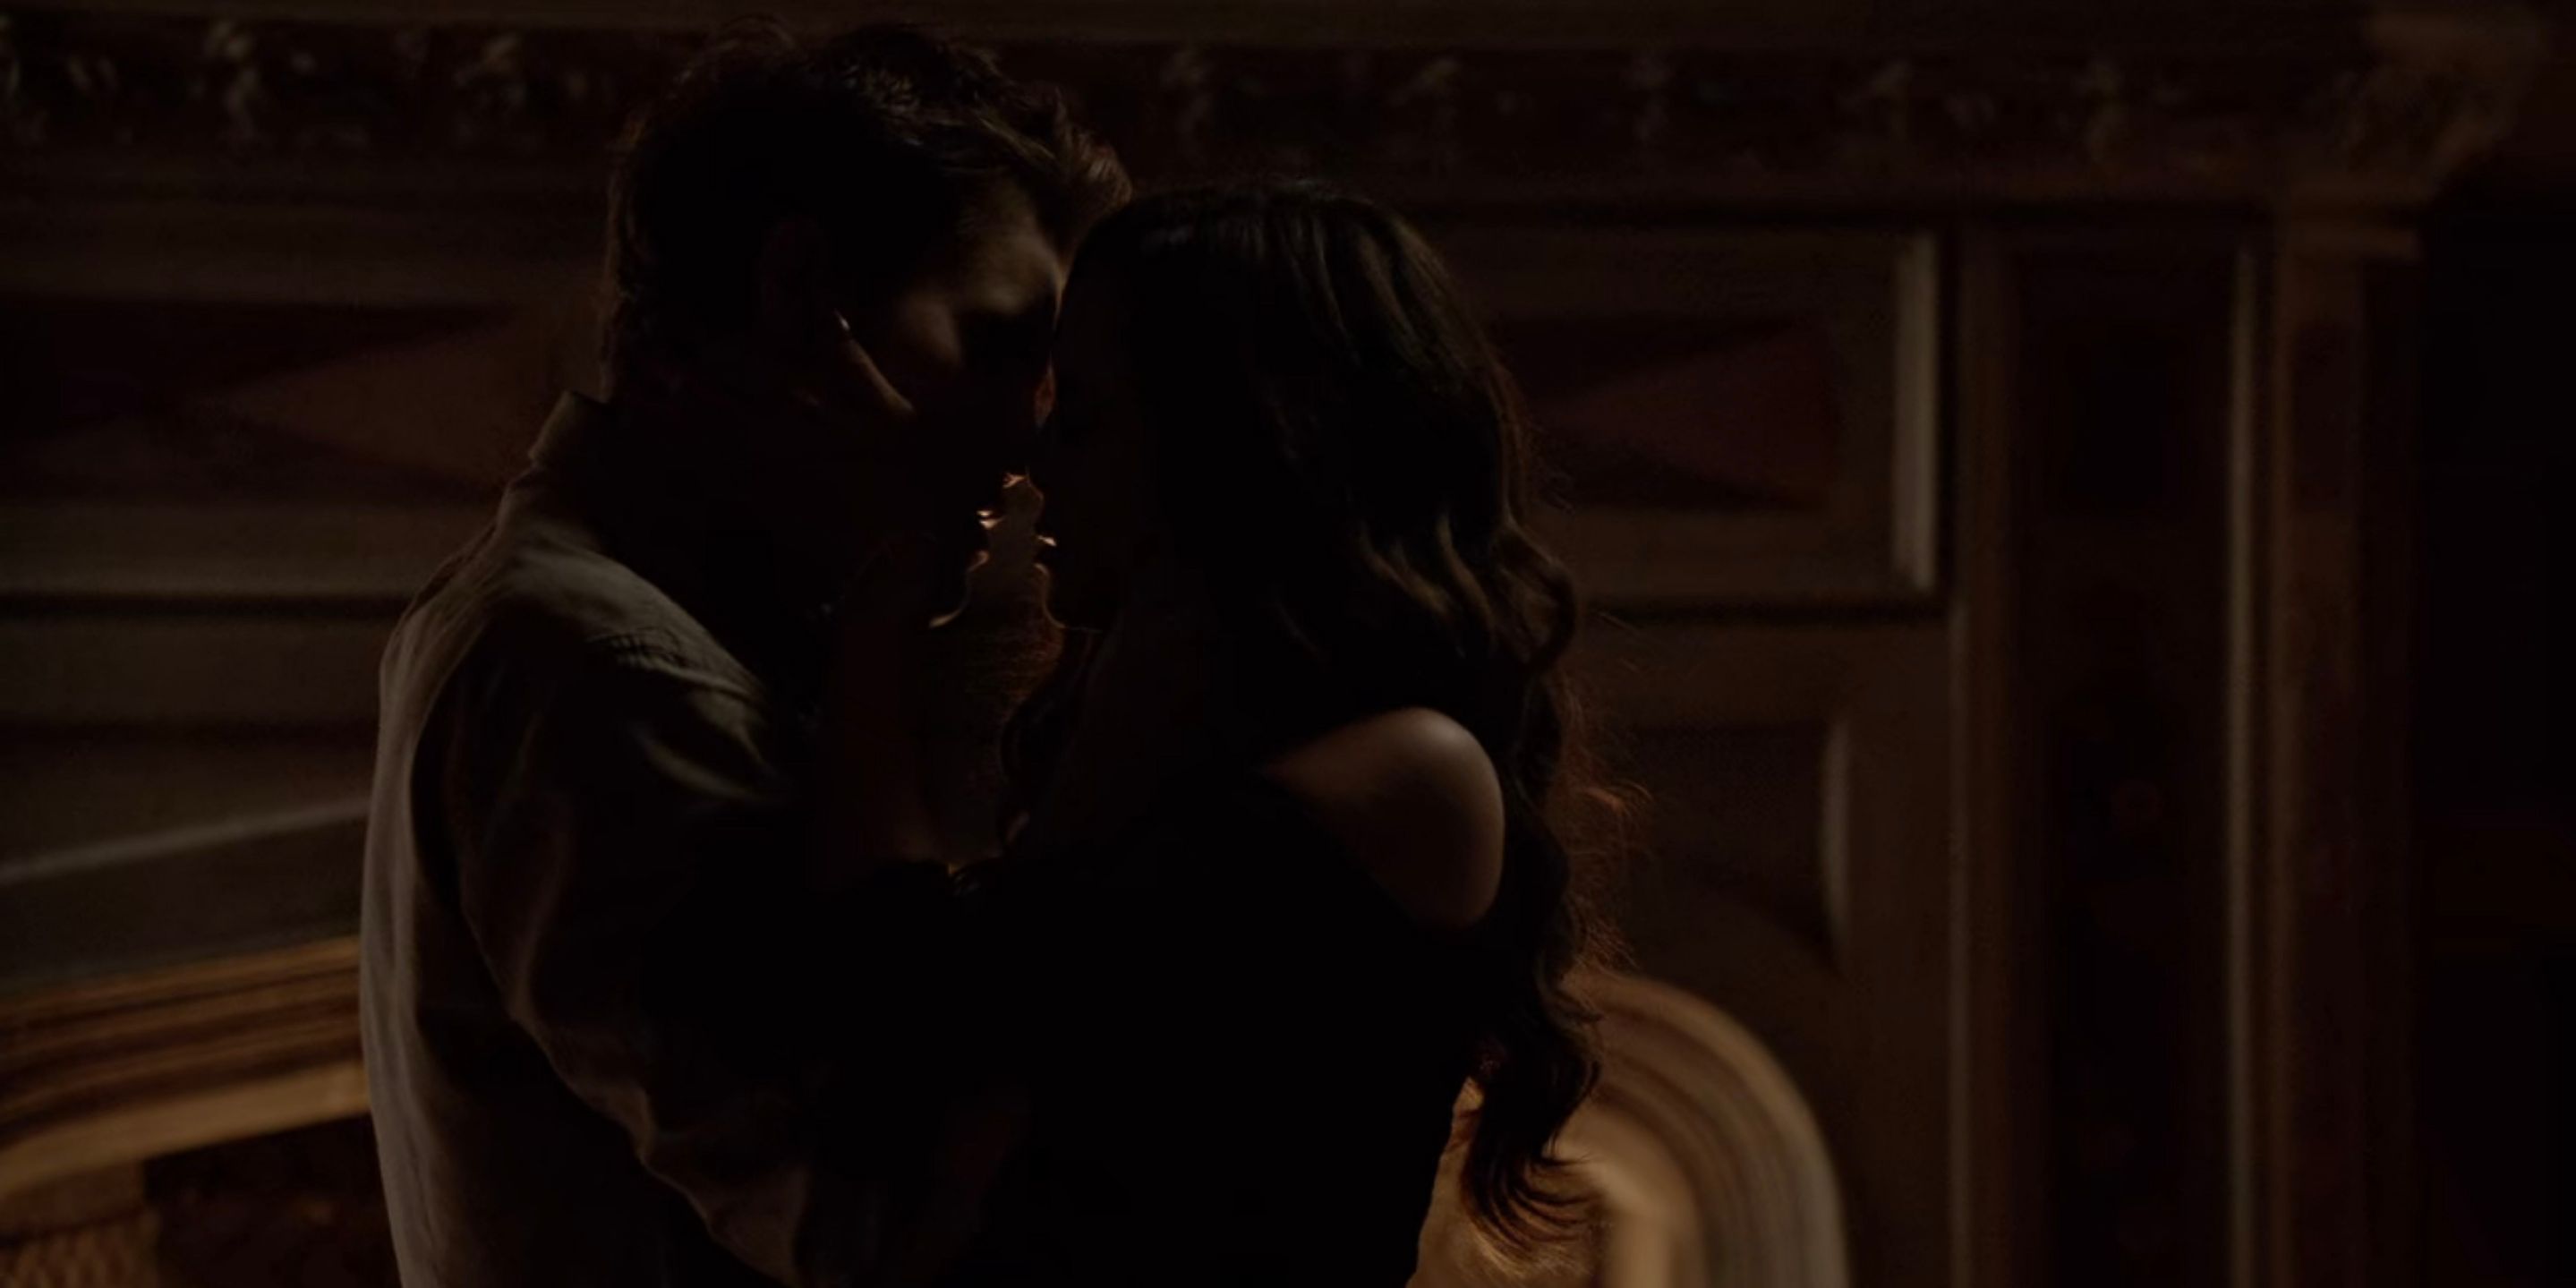 Stefan and Katherine kiss in The Vampire Diaries.